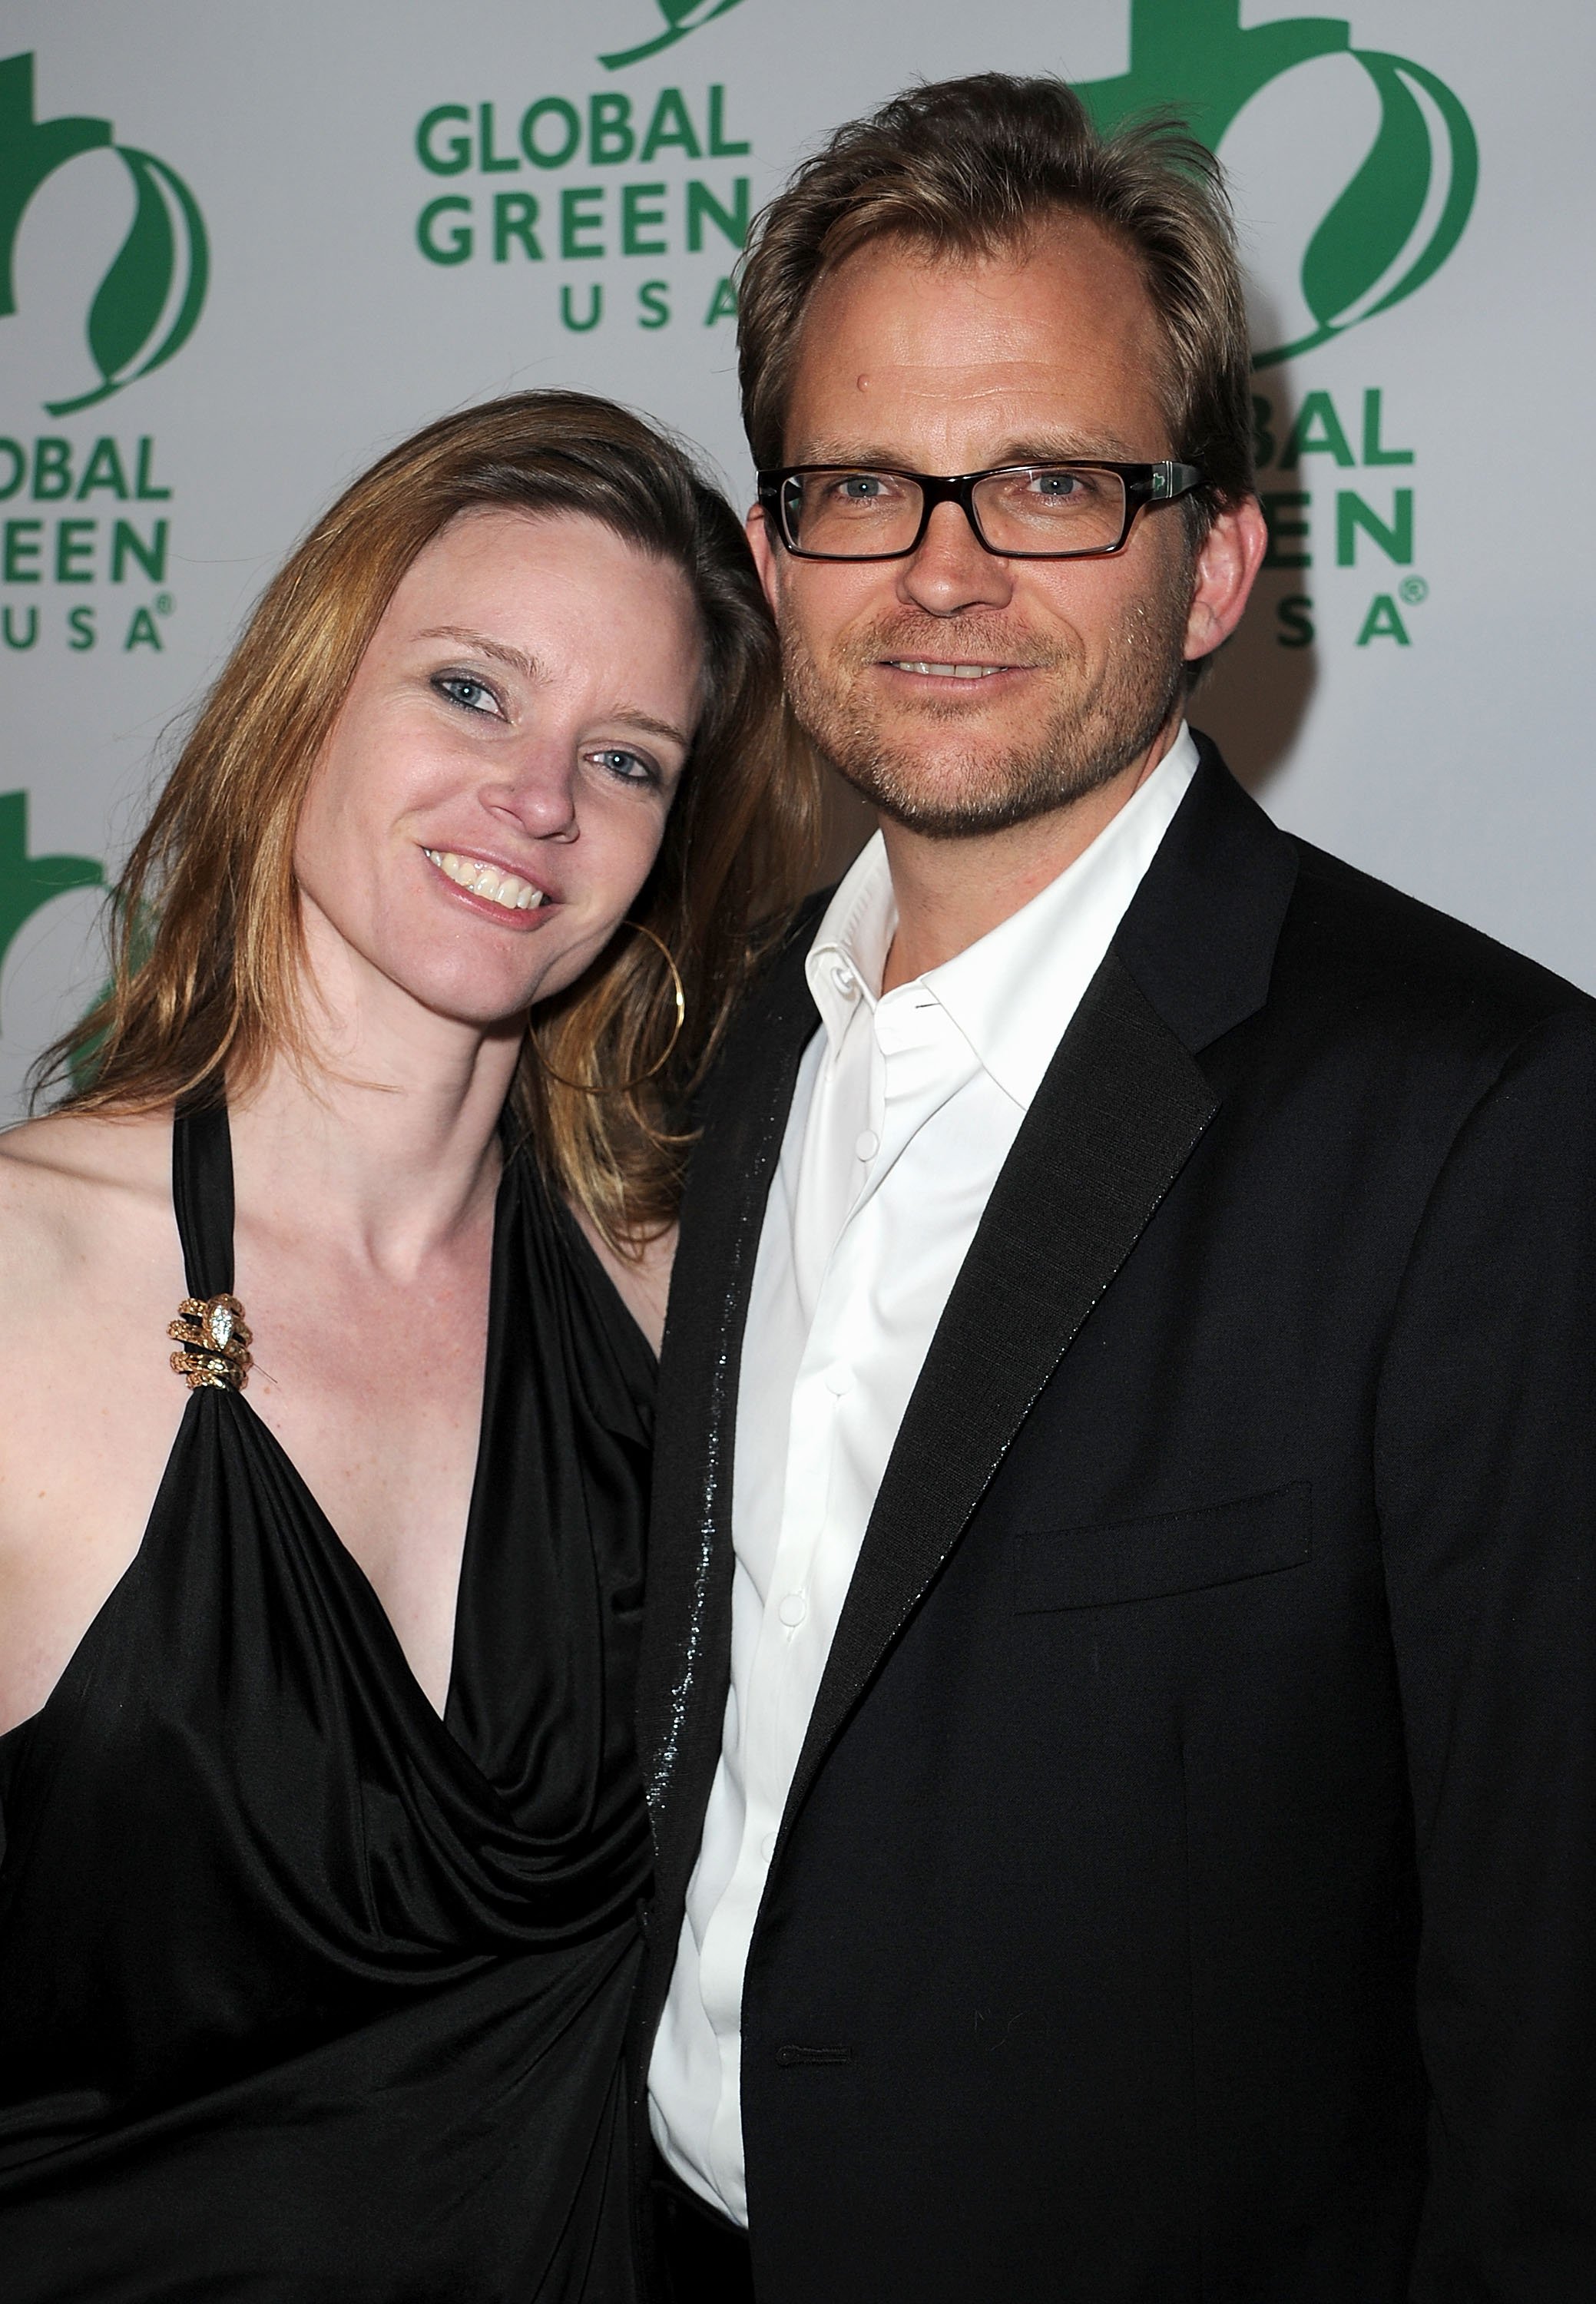 Matt Petersen and Justine Musk pose as they arrive at Global Green USA's 8th annual pre-Oscar party "Greener Cities For A Cooler Planet" held at Avalon on February 23, 2011, in Hollywood, California | Source: Getty Images